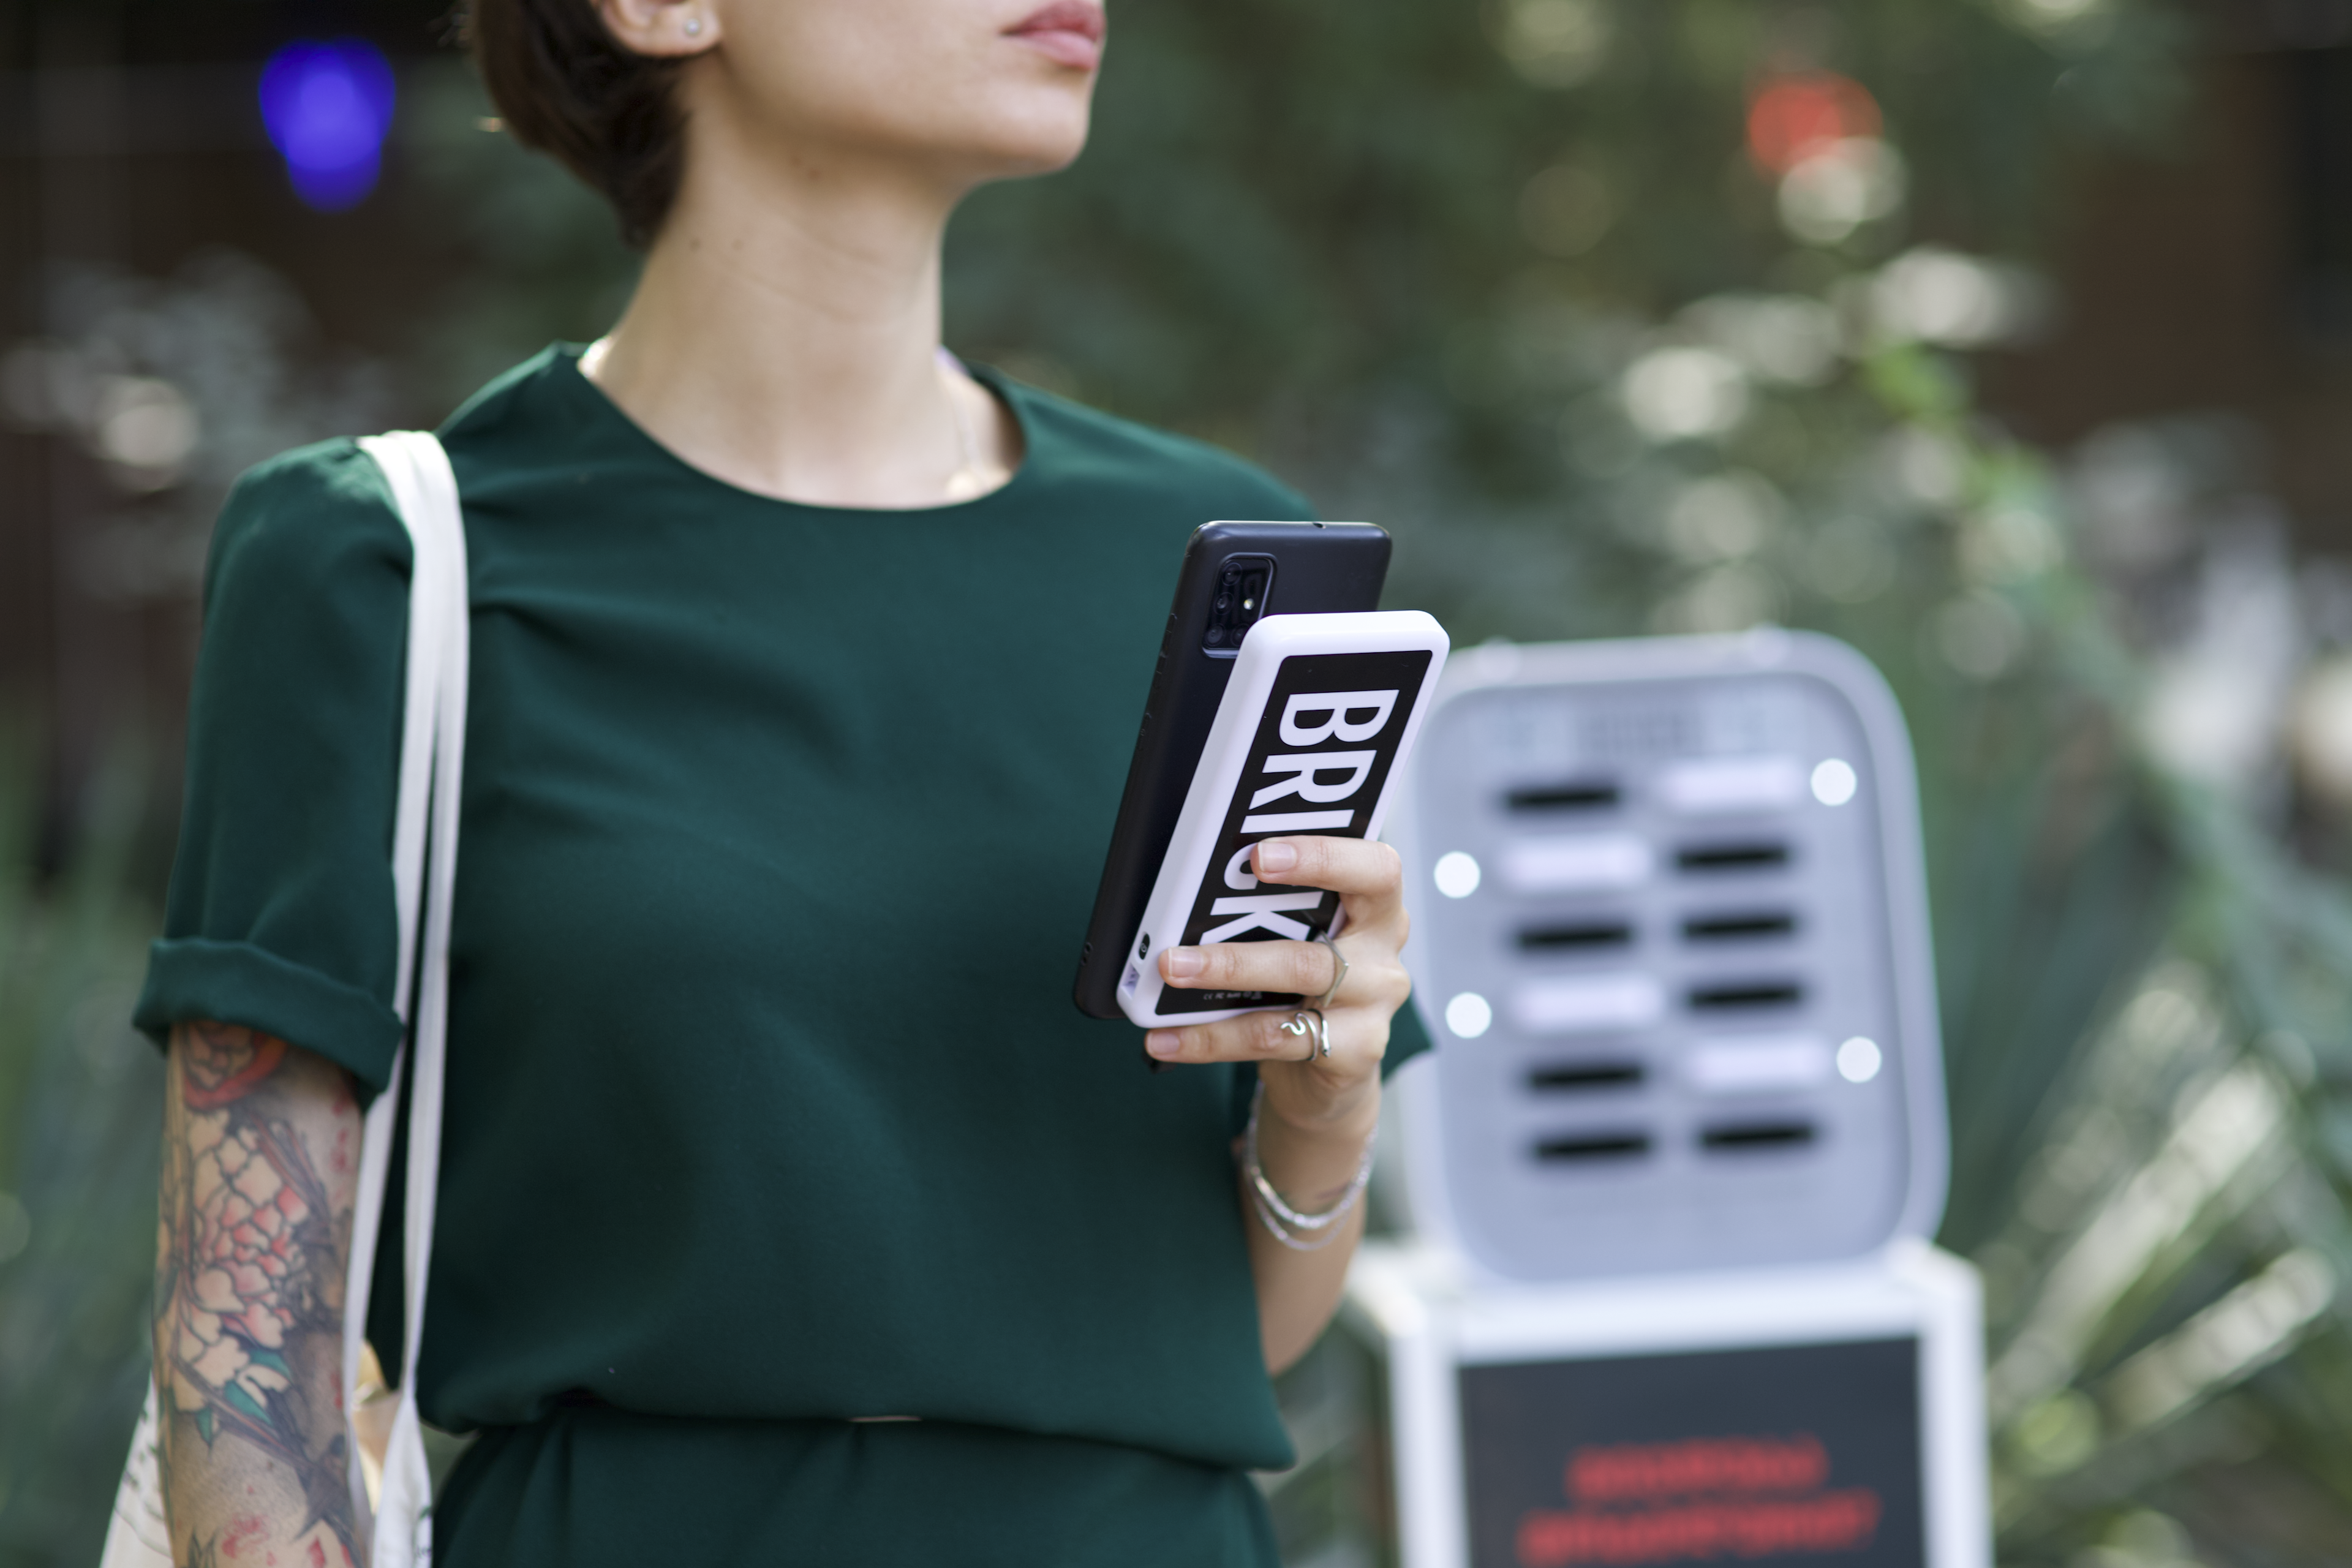 A woman holding a Brick power bank in front of a rental station